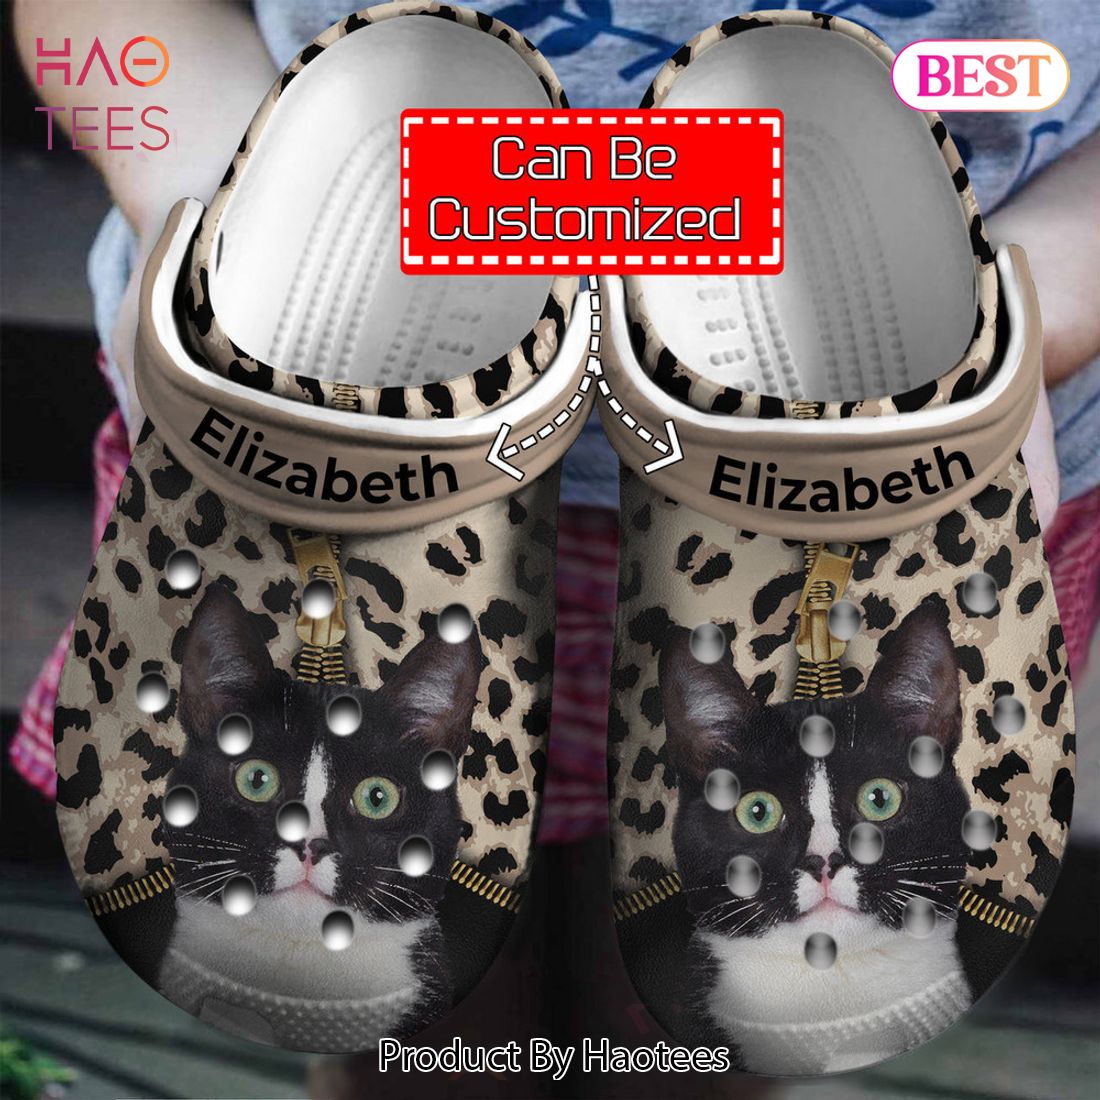 Personalized Cat Lovers Clogs Shoes, Custom Photo Face Clogs Shoes